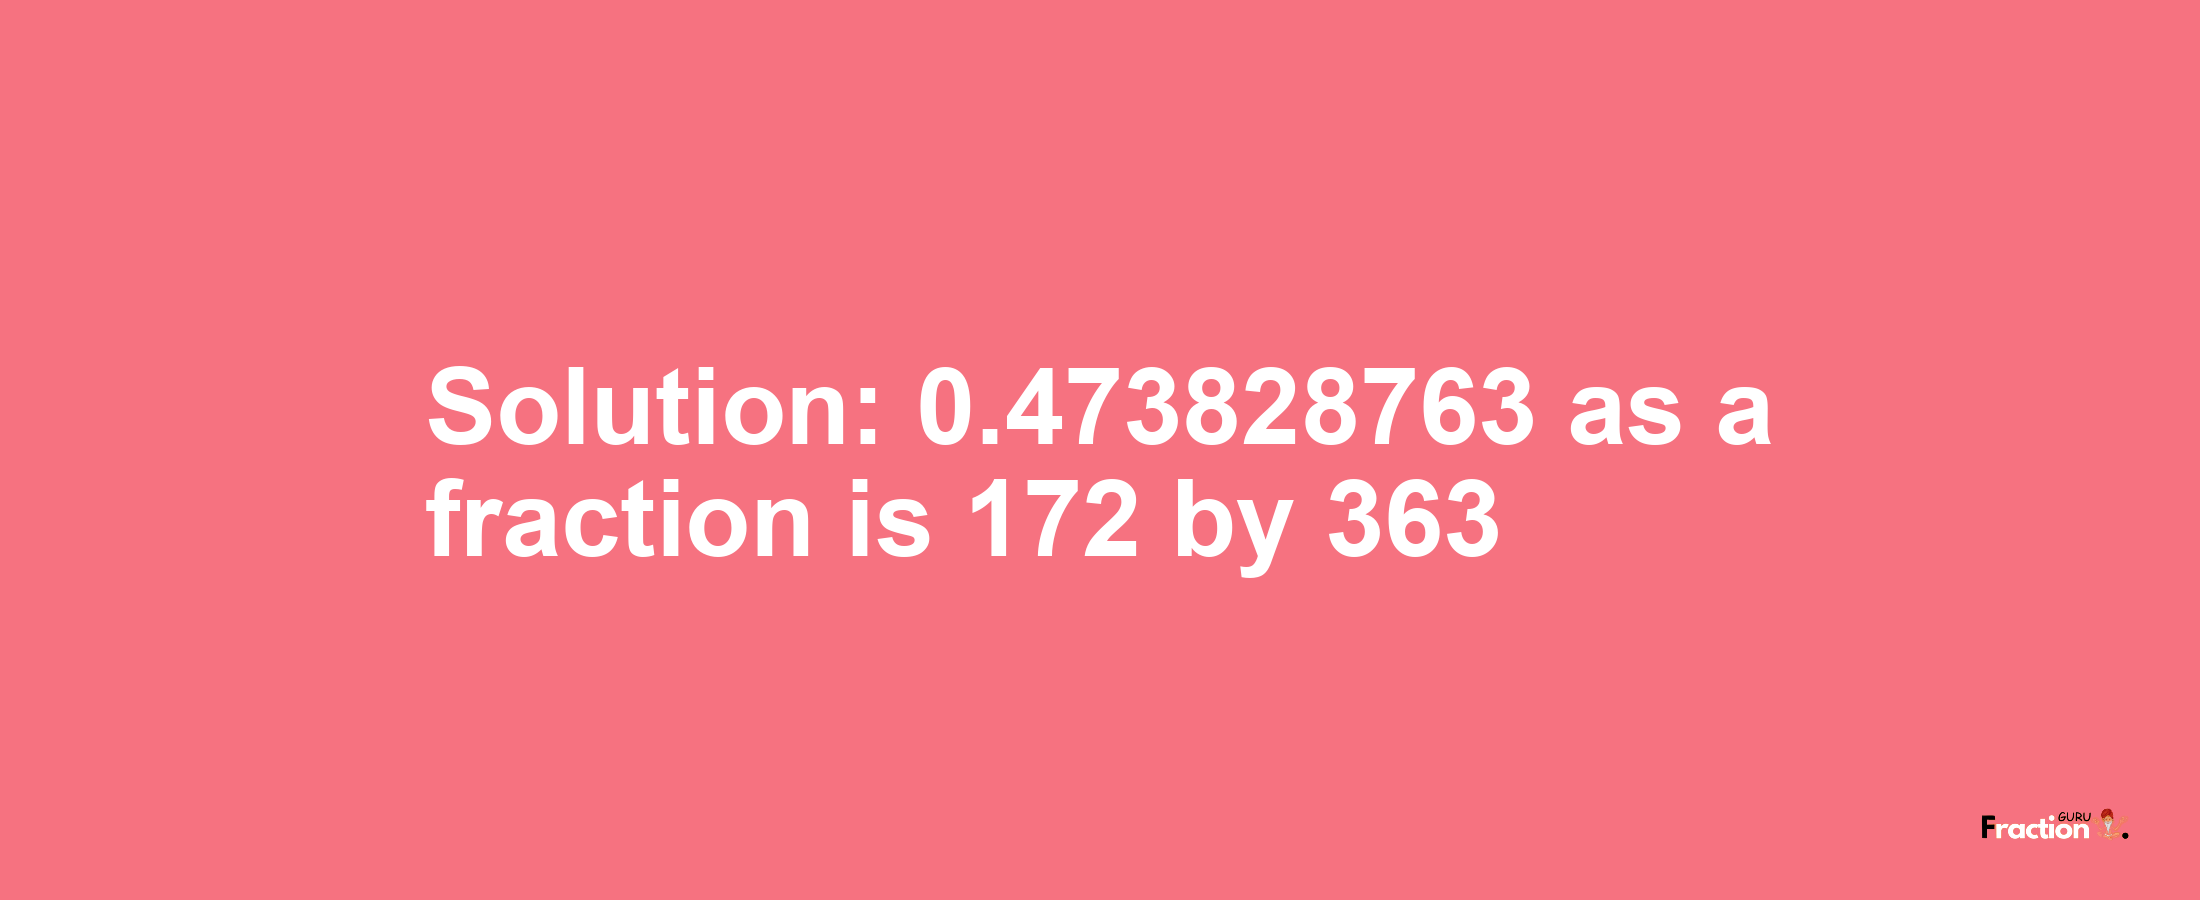 Solution:0.473828763 as a fraction is 172/363